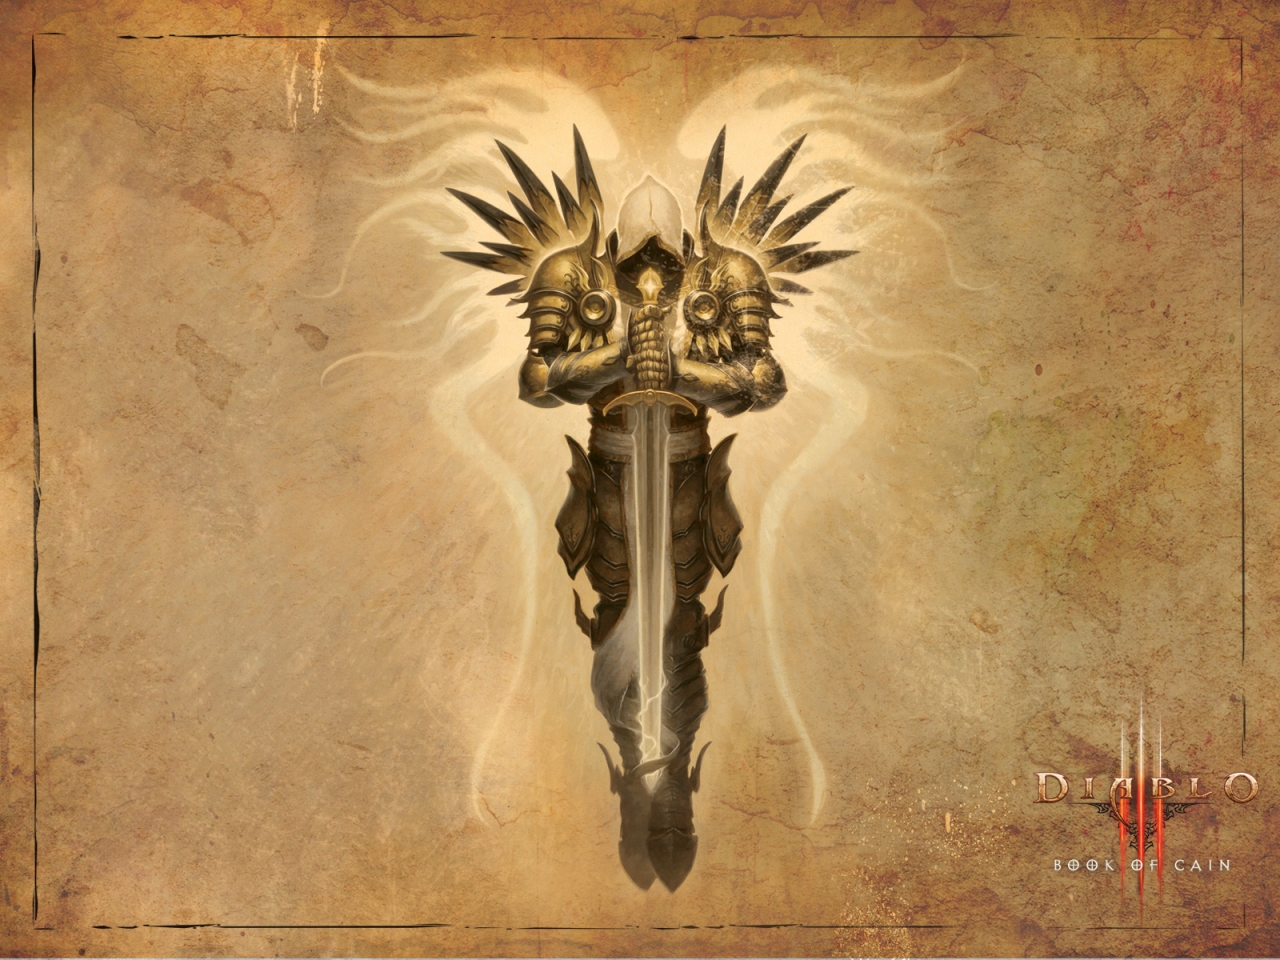 Book of Cain Diablo 3 for 1280 x 960 resolution